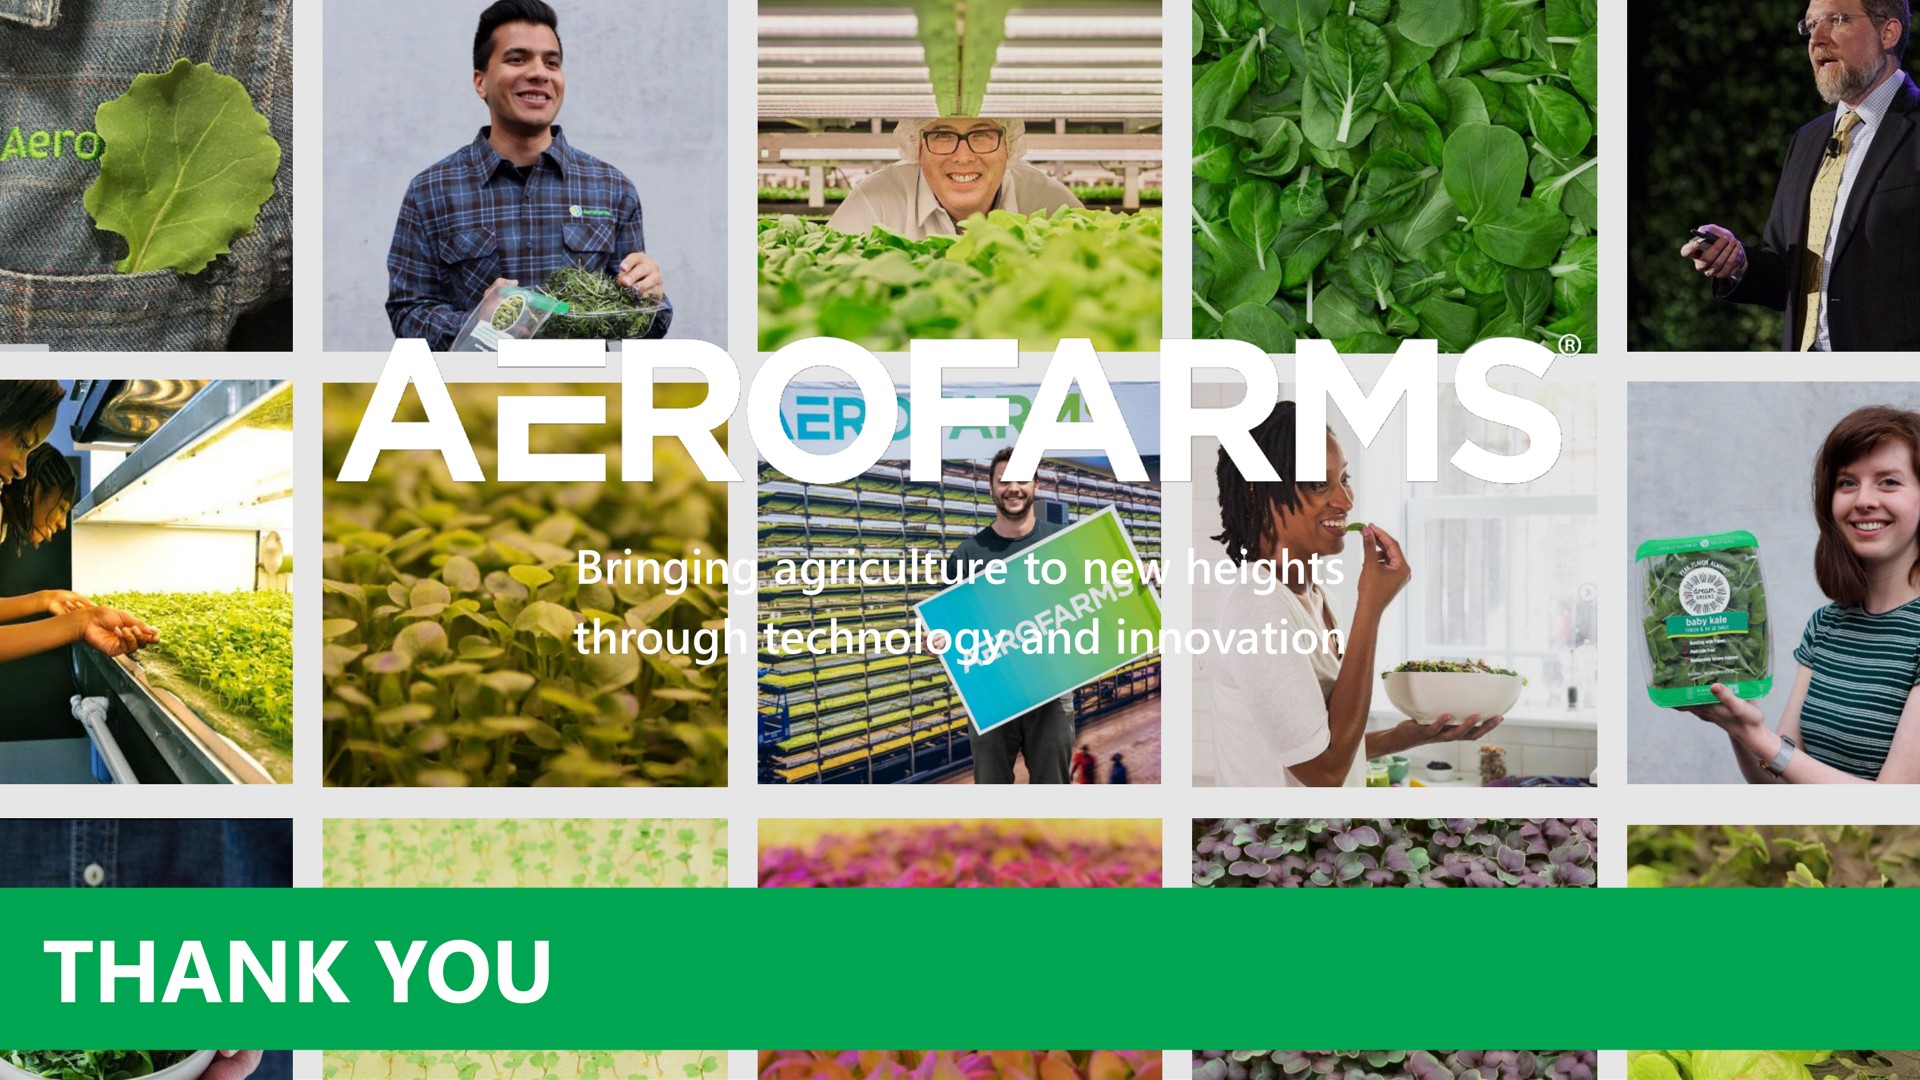 bringing agriculture to new heights through technology and innovation thank you | AeroFarms